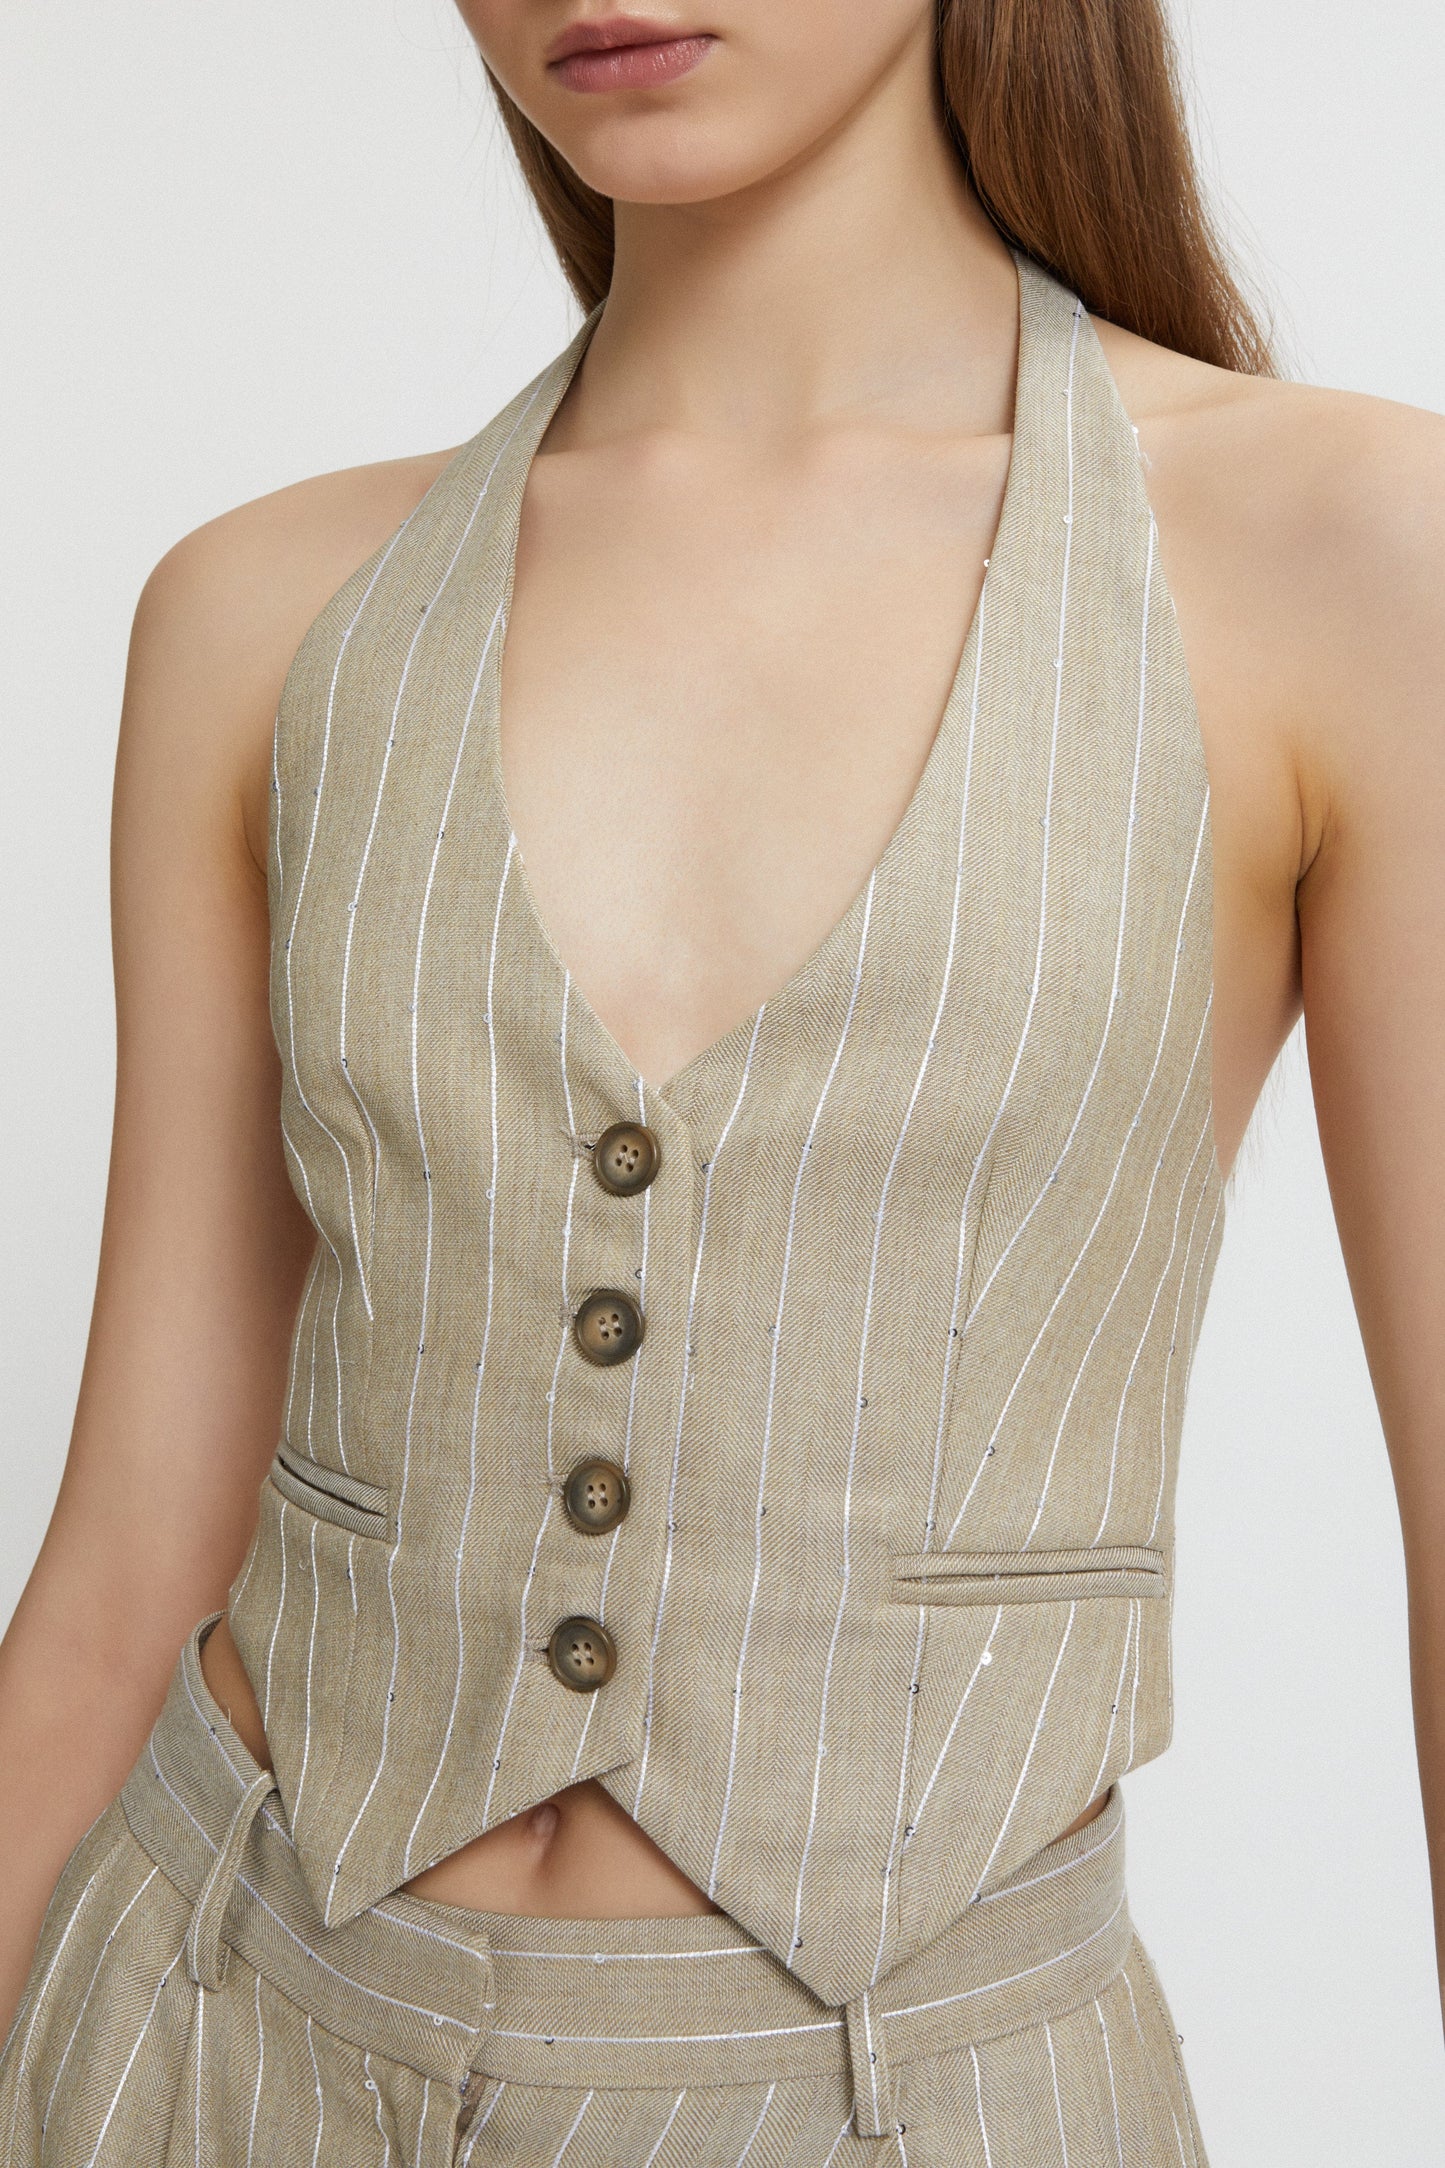 PRINSTRIPE WAISTCOAT WITH SEQUINS